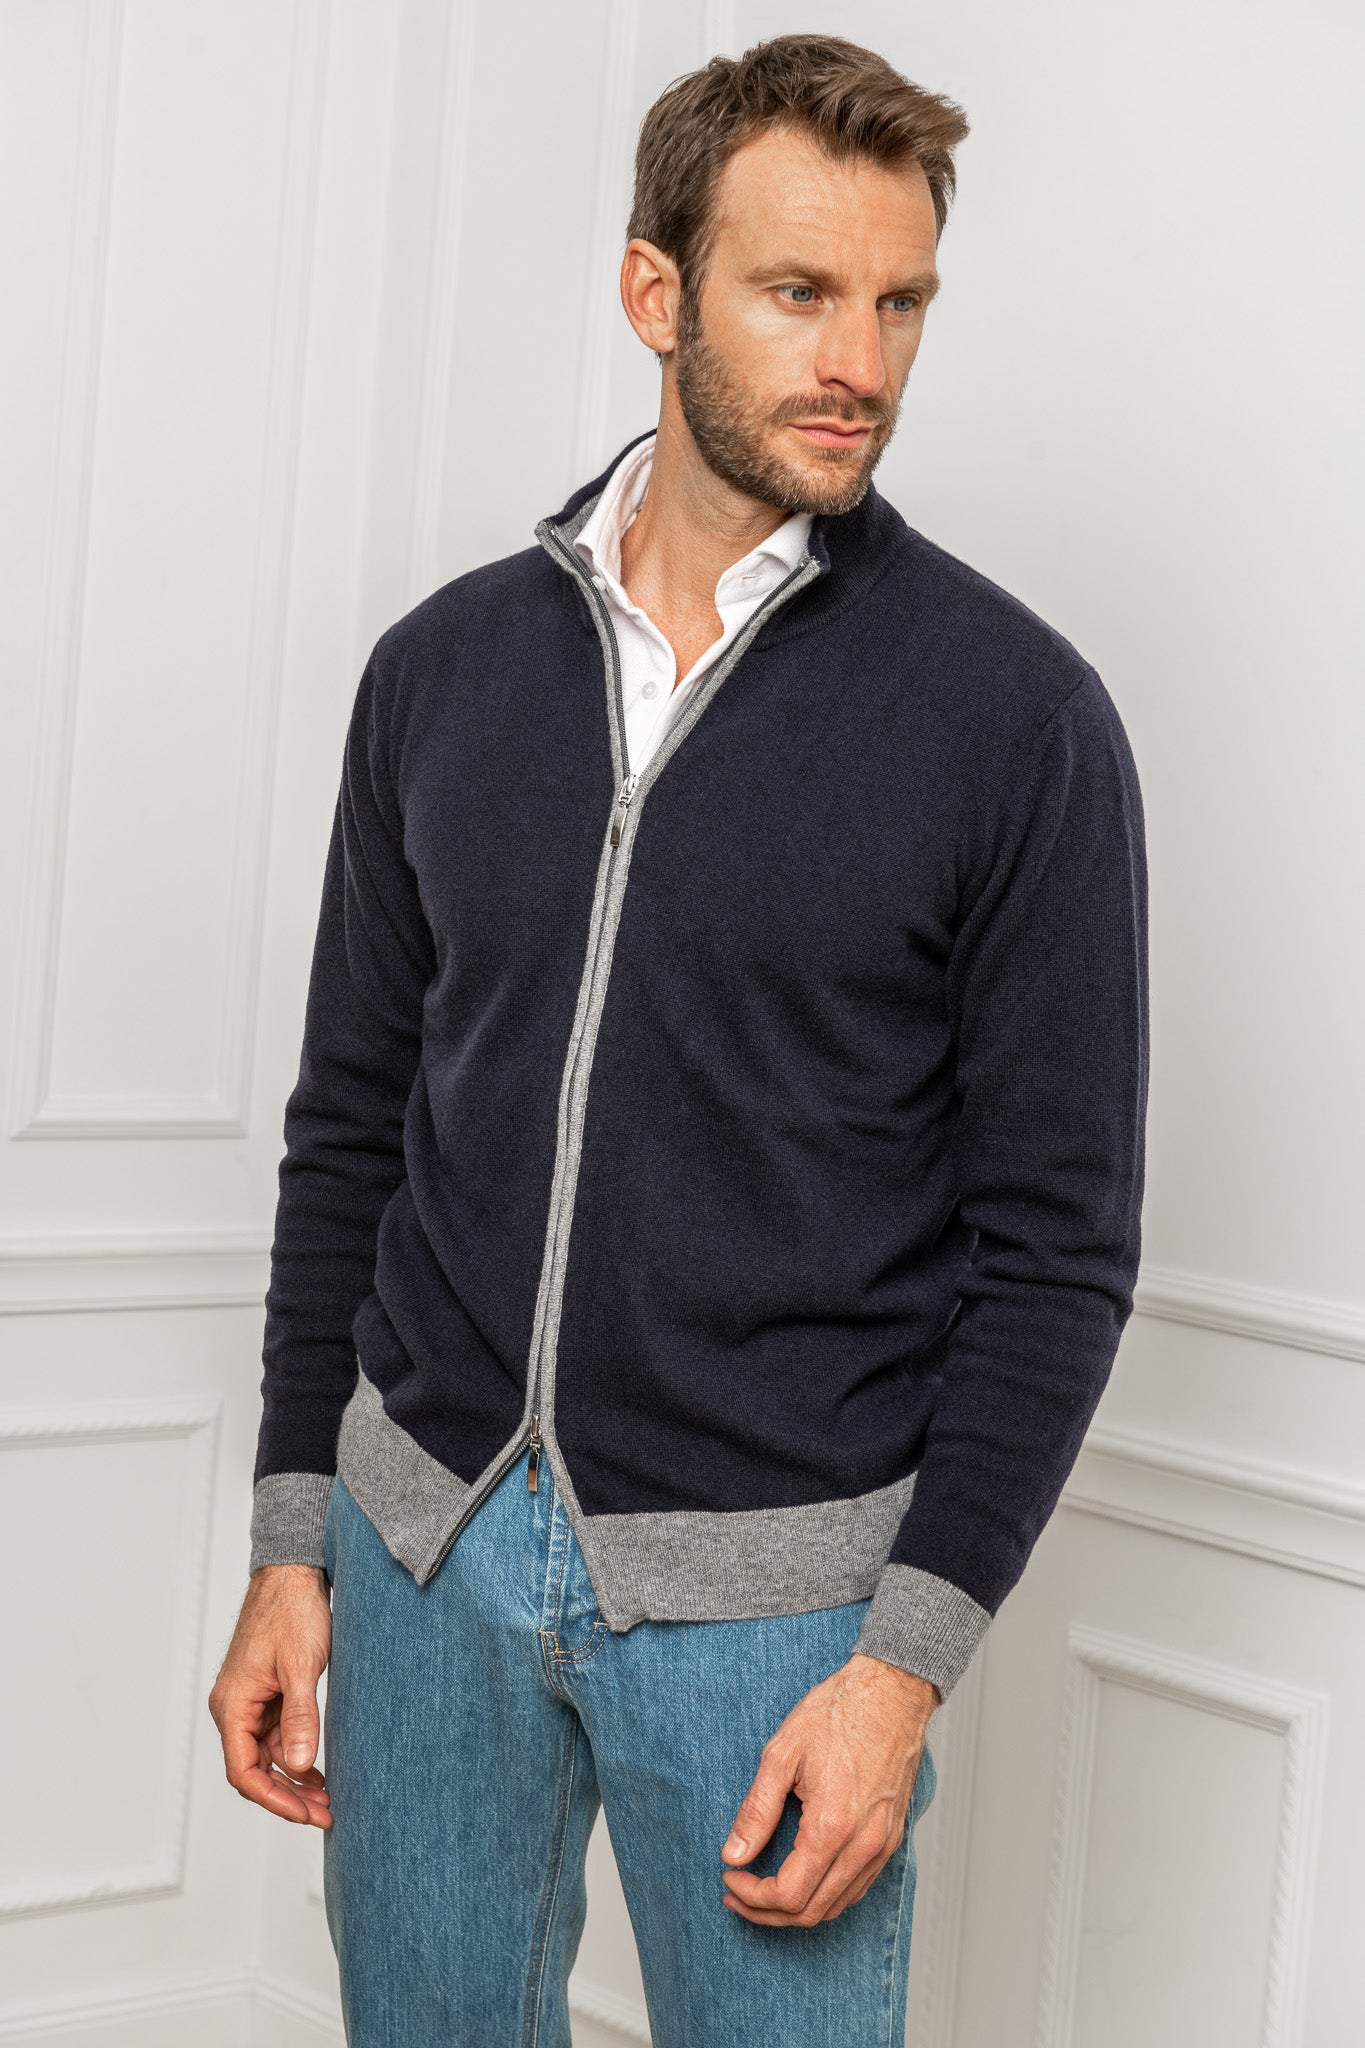 Blue and grey full zip cardigan – Made in Italy